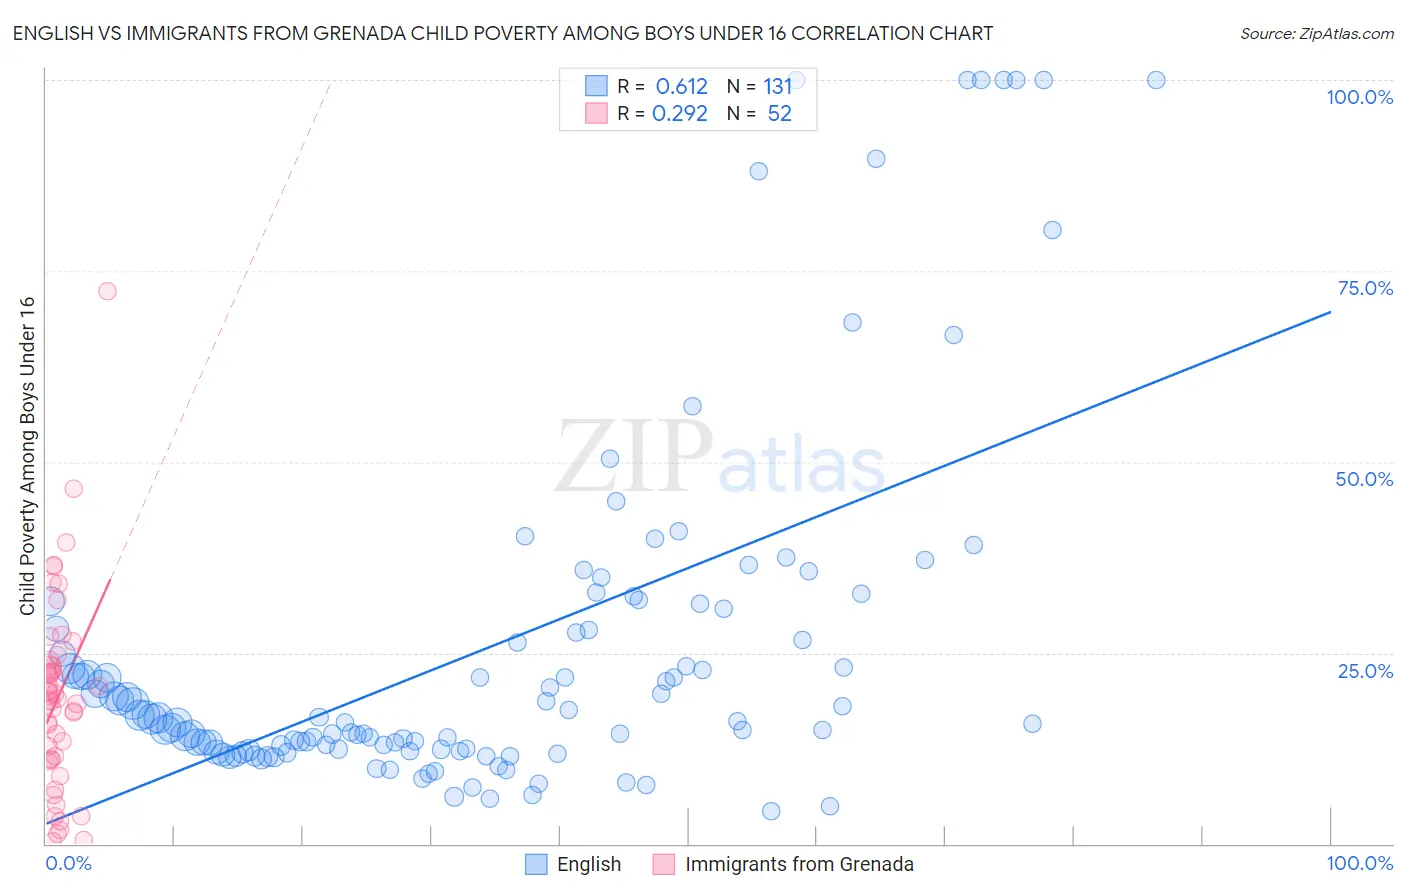 English vs Immigrants from Grenada Child Poverty Among Boys Under 16